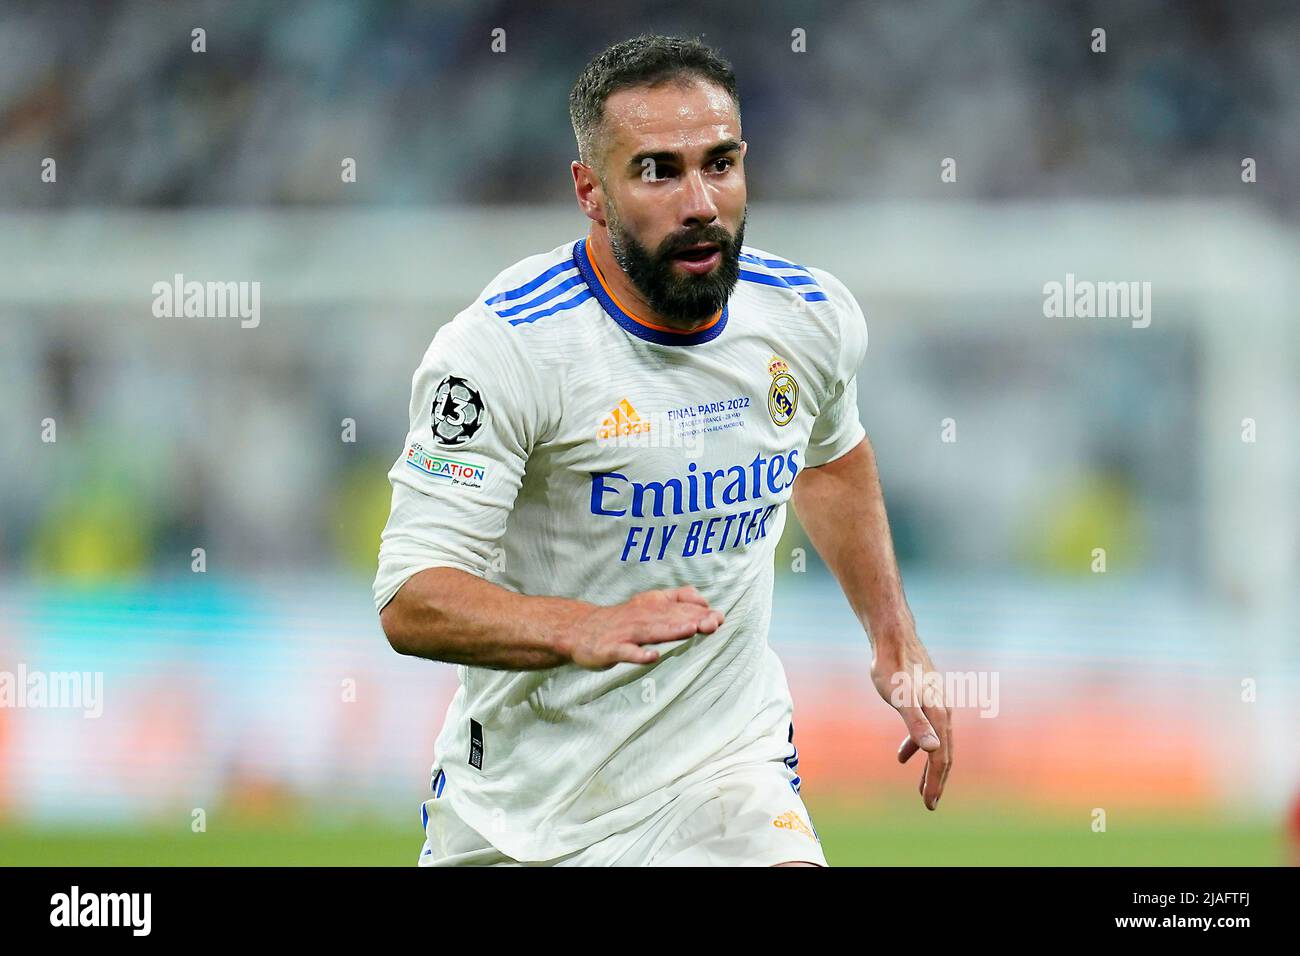 Daniel Carvajal of Real Madrid during the UEFA Champions League Final match between Liverpool FC and Real Madrid played at Stade de France on May 28, 2022 in Paris, France. (Photo / Magma) Stock Photo